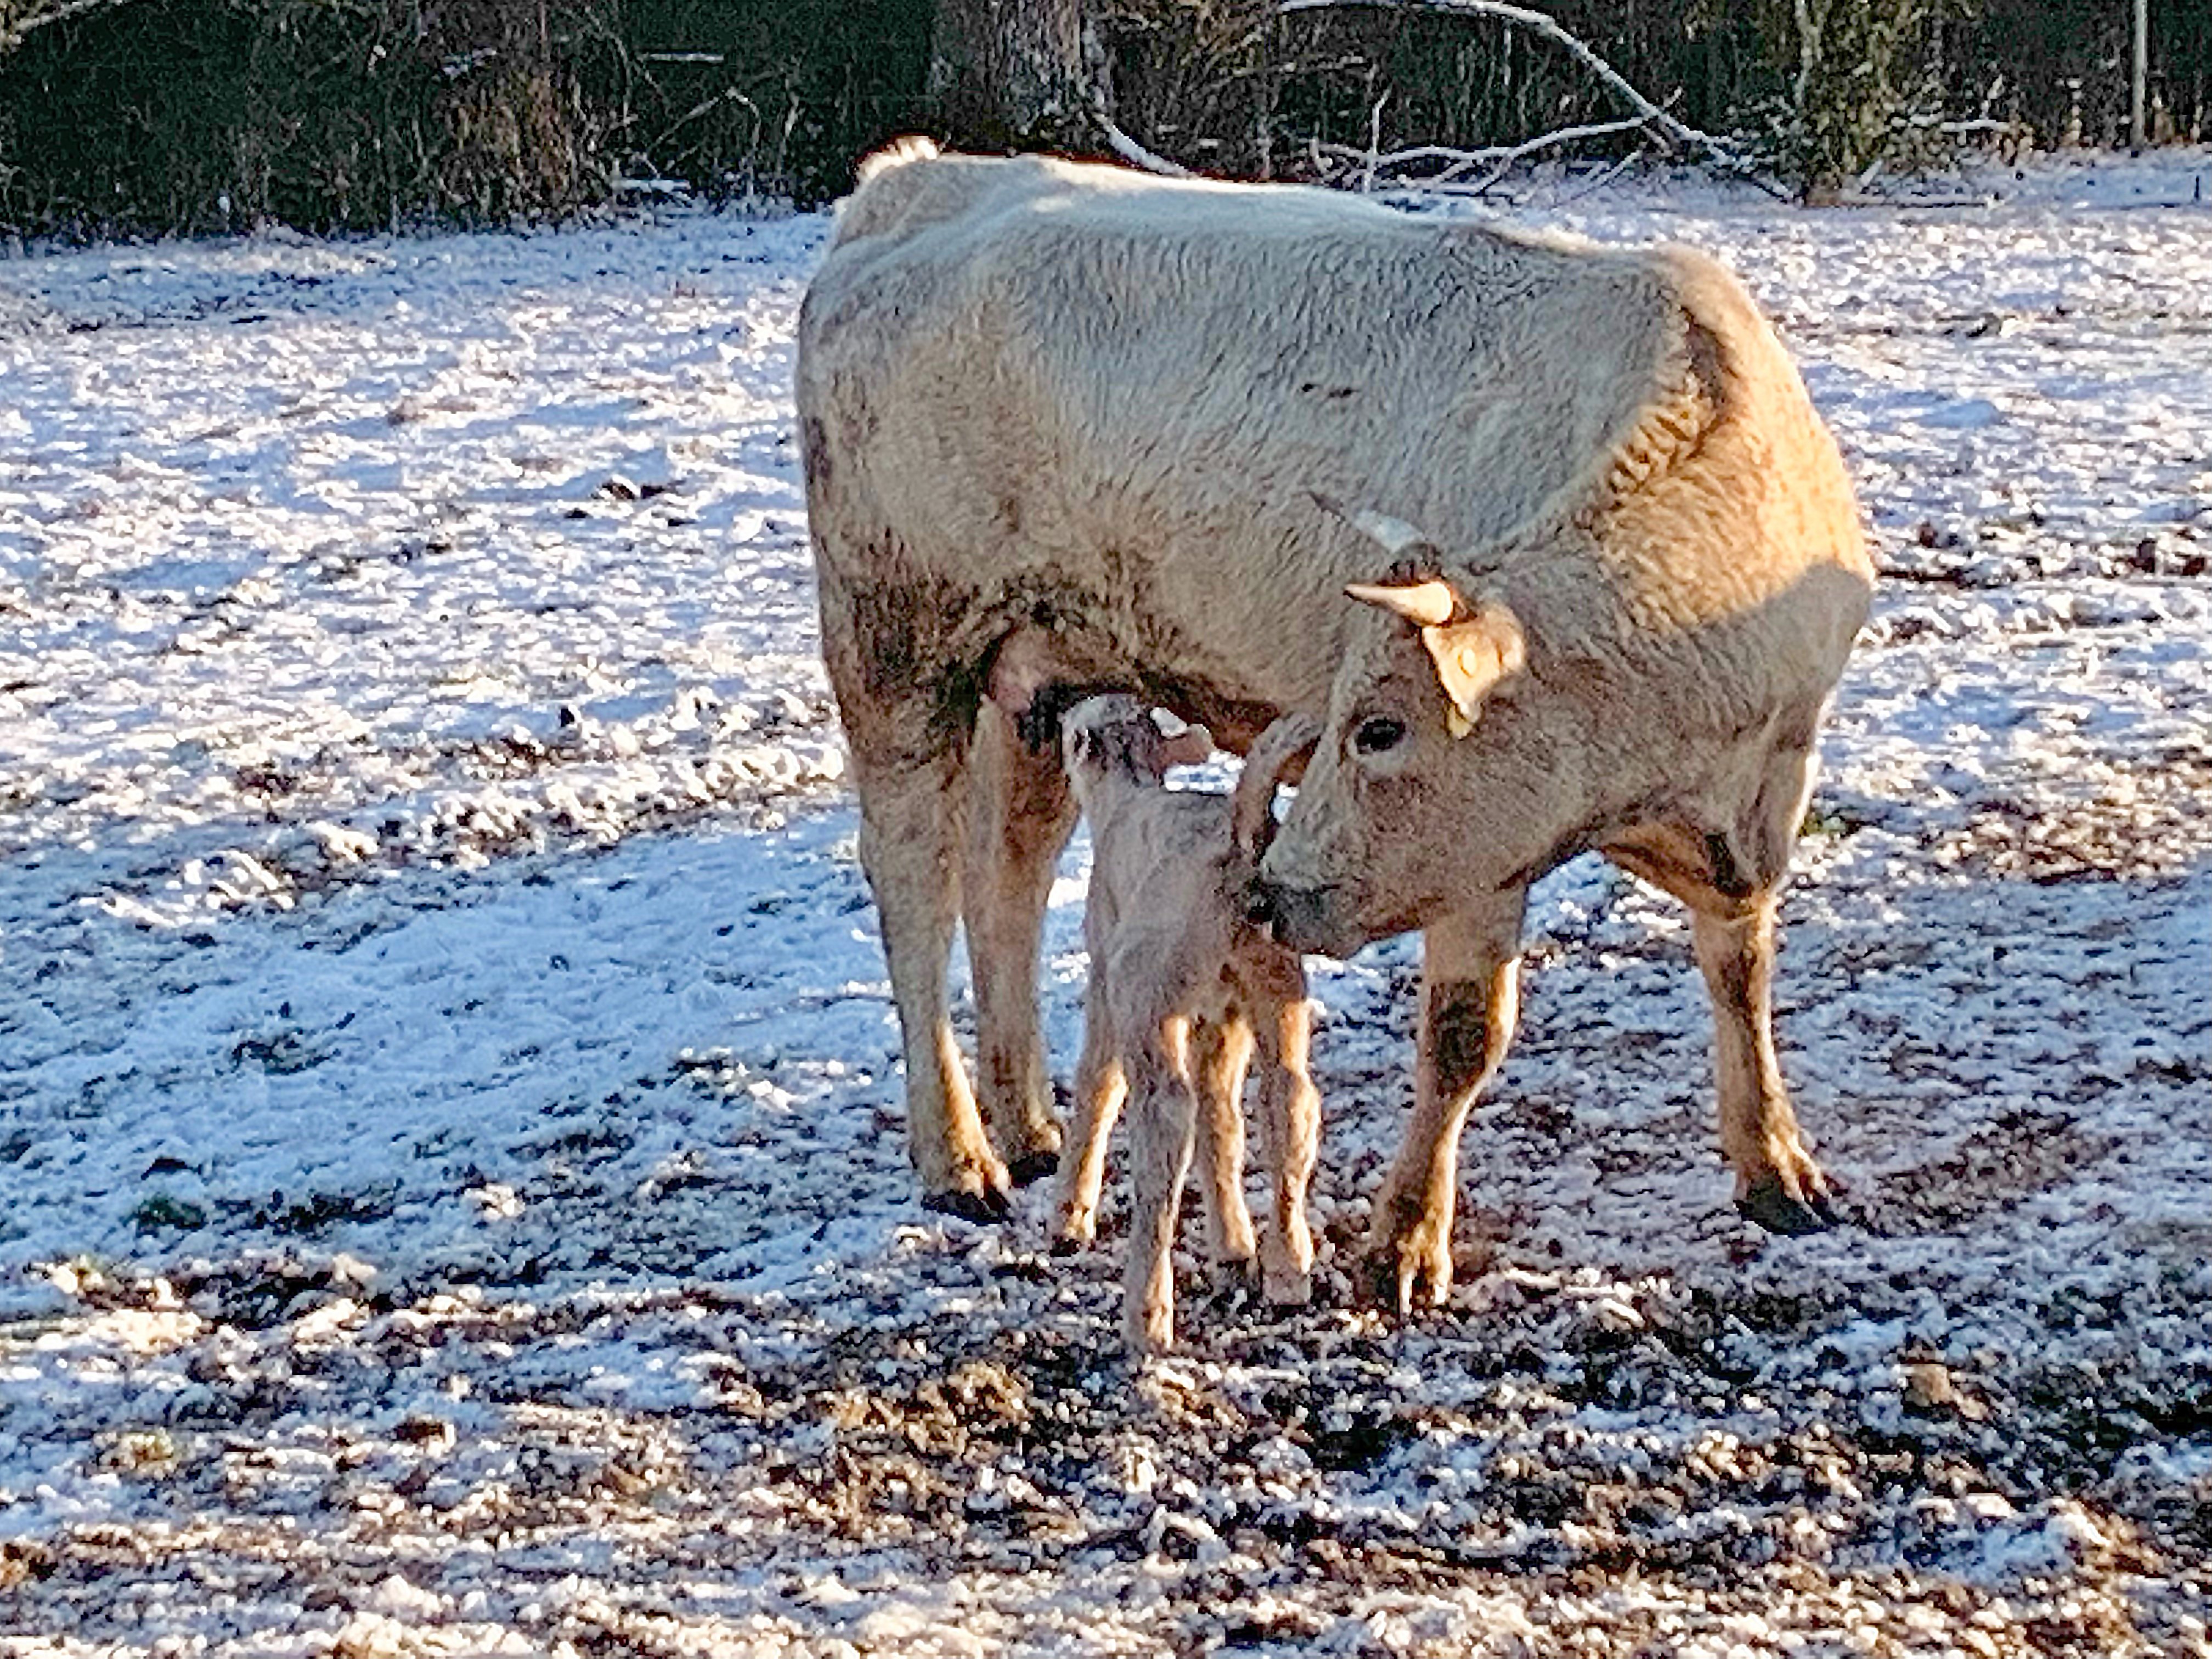  Newborn calf suckling momma cow in a snow-covered field in Pike County, Arkansas.